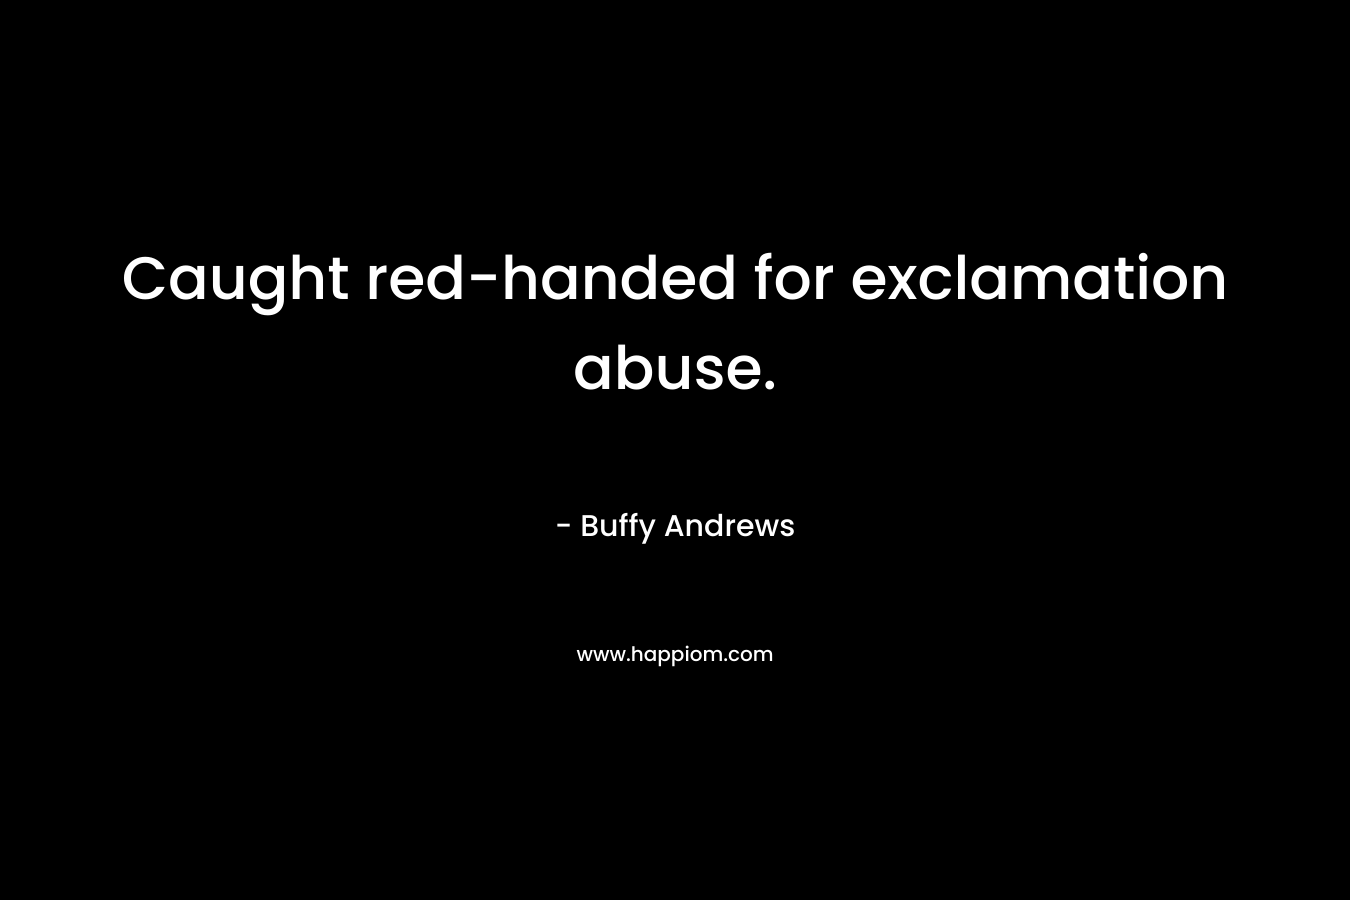 Caught red-handed for exclamation abuse. – Buffy Andrews